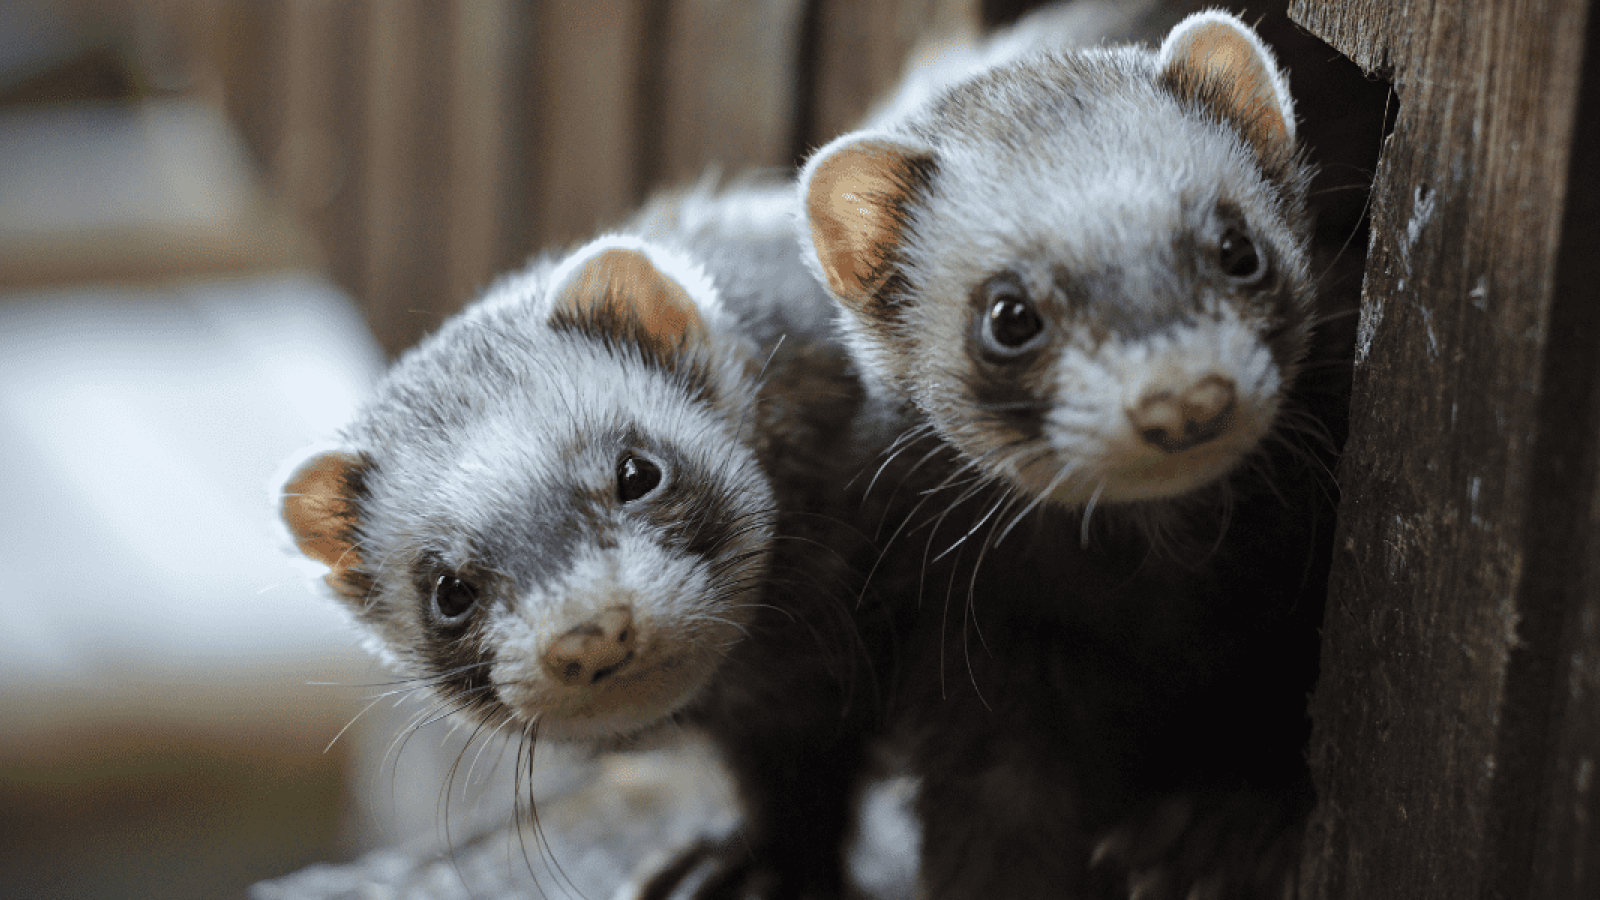 Ferrets in medical research